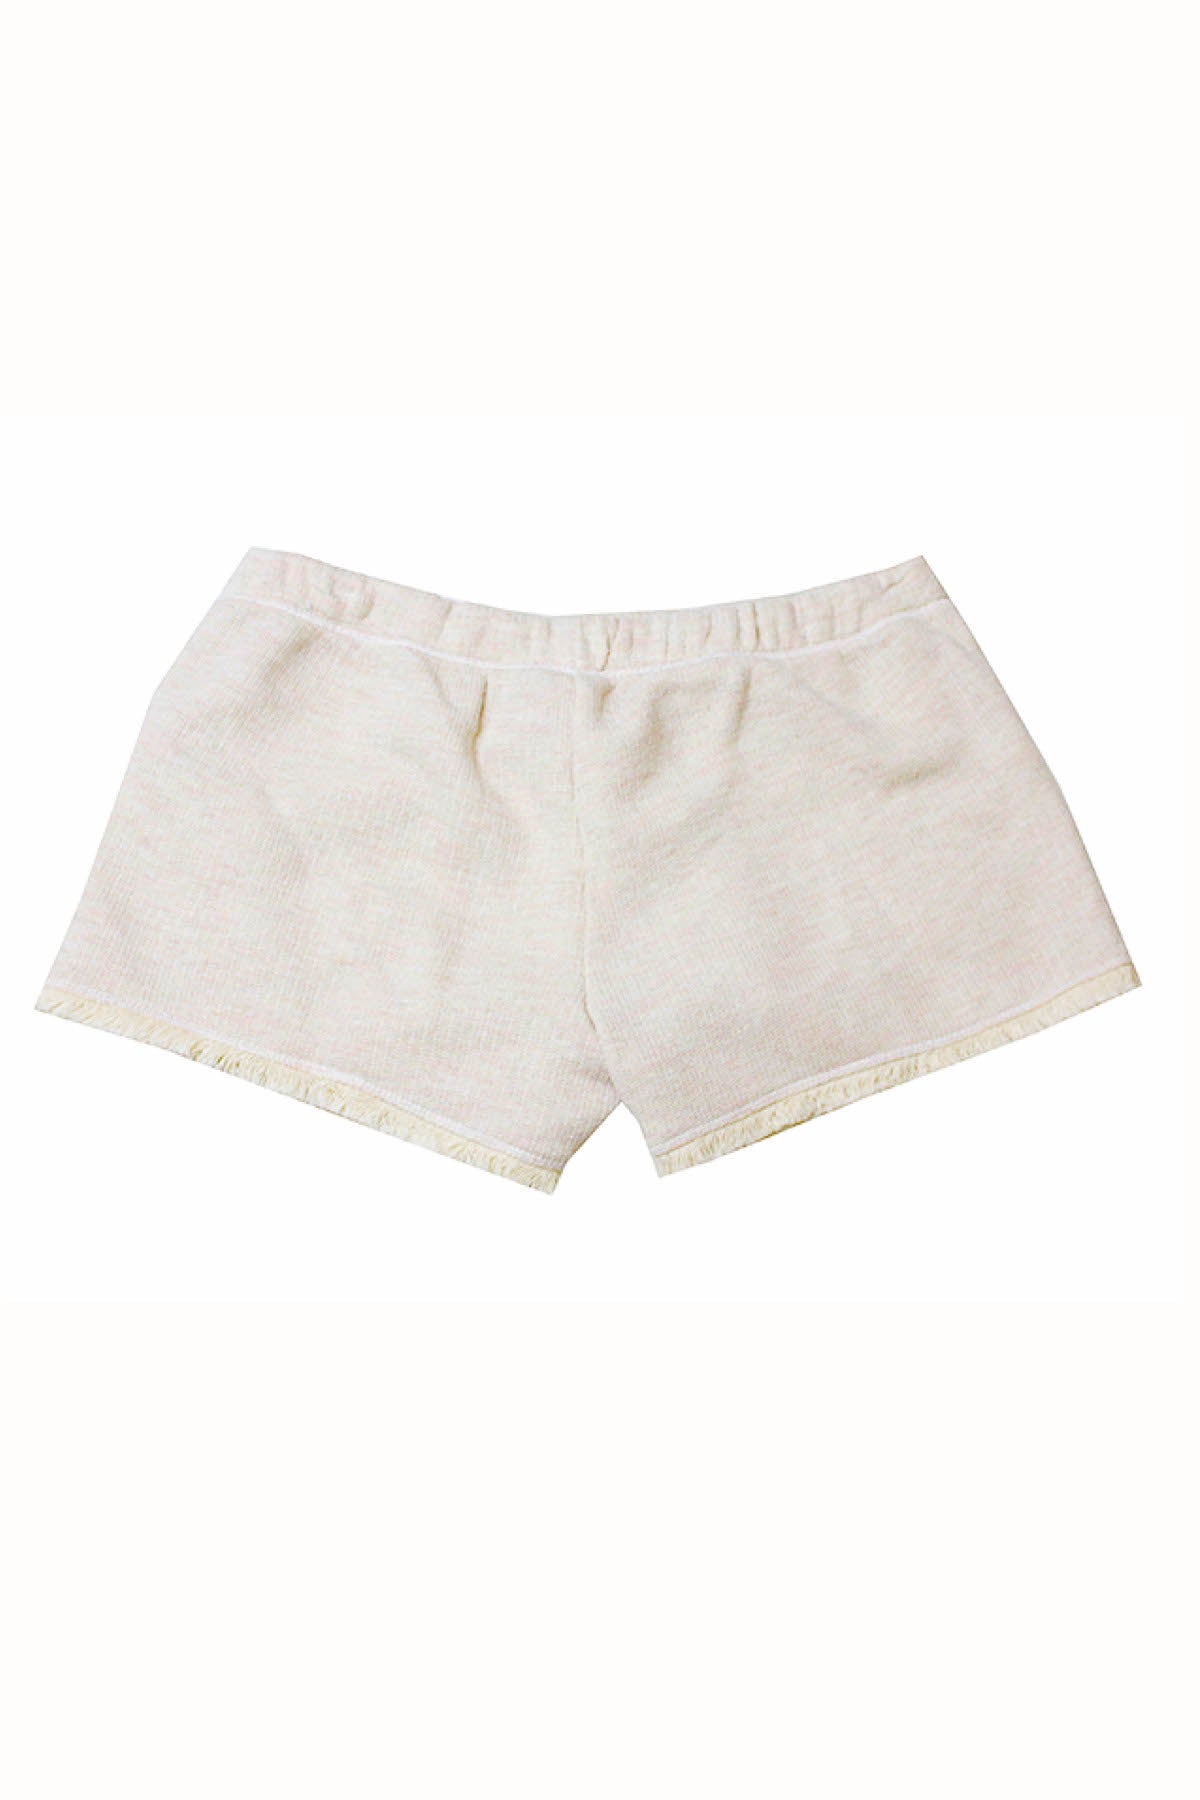 Lucky Brand Oatmeal Brushed Back Terry Pajama Short